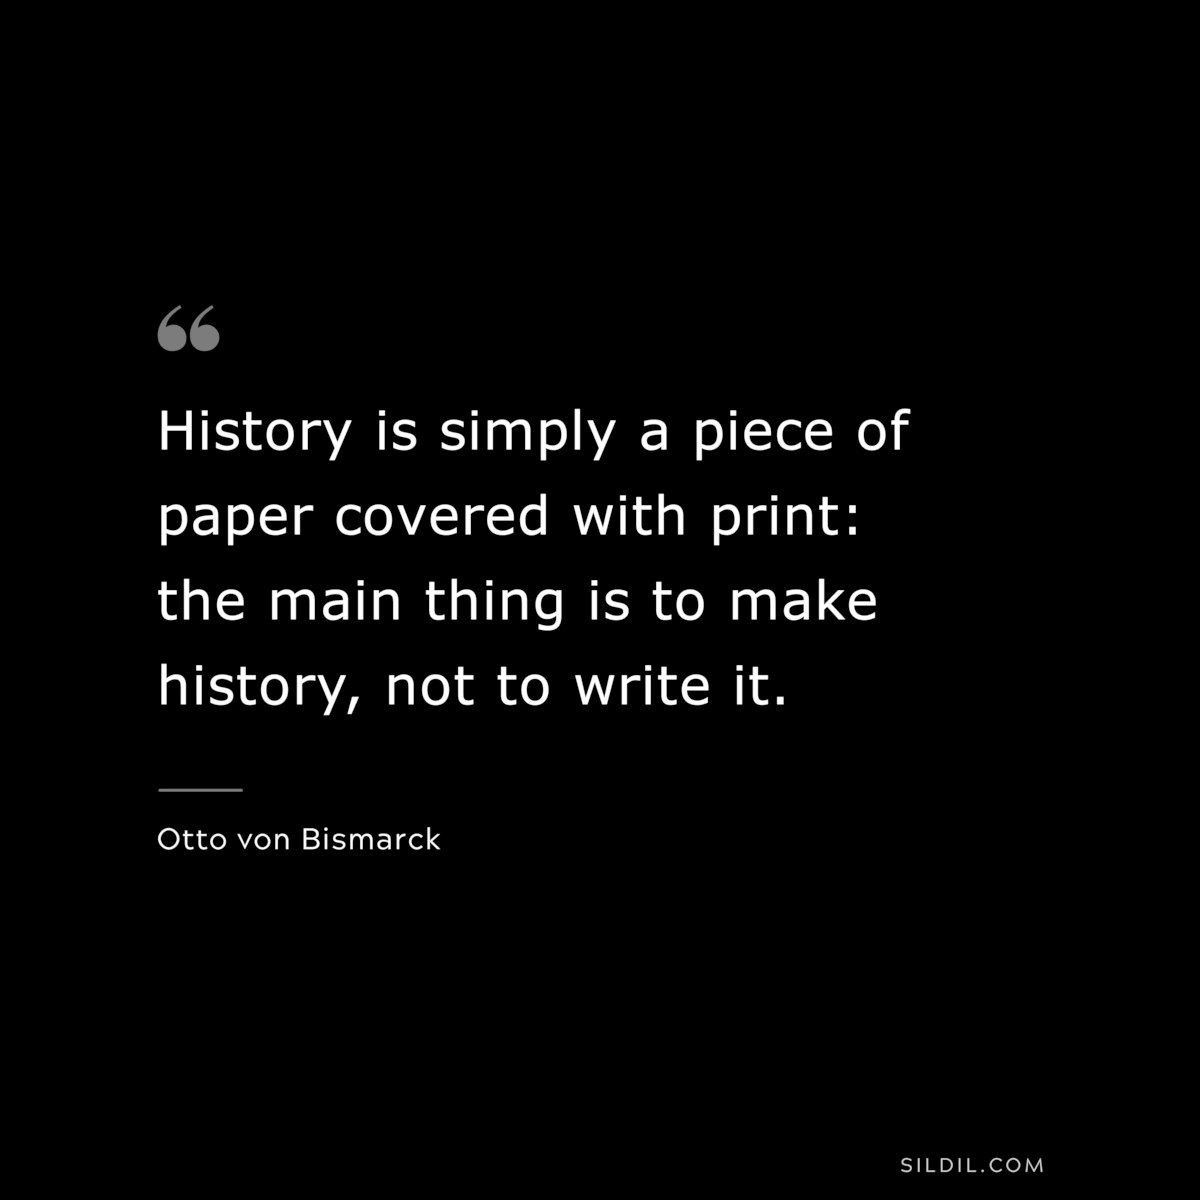 History is simply a piece of paper covered with print: the main thing is to make history, not to write it. ― Otto von Bismarck